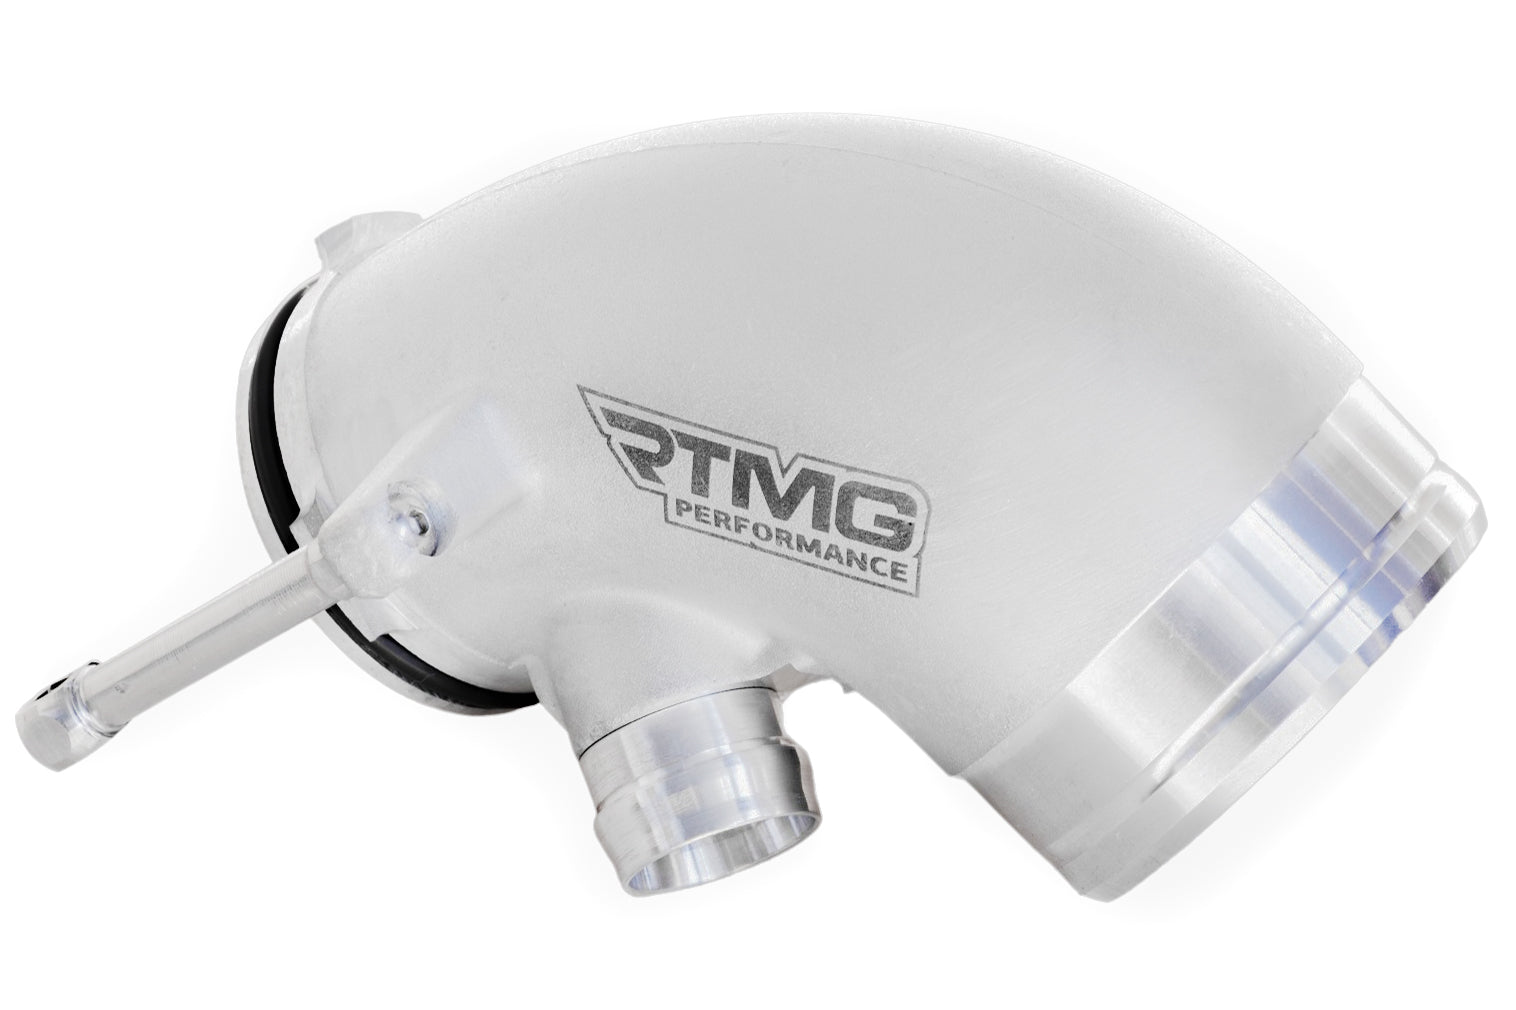 RTMG 70mm Turbo Inlet Elbow for IHI IS12 / IS20 / IS38 - 1.8 / 2.0 TSI ΕΑ888 Gen 3 - RTMG Performance